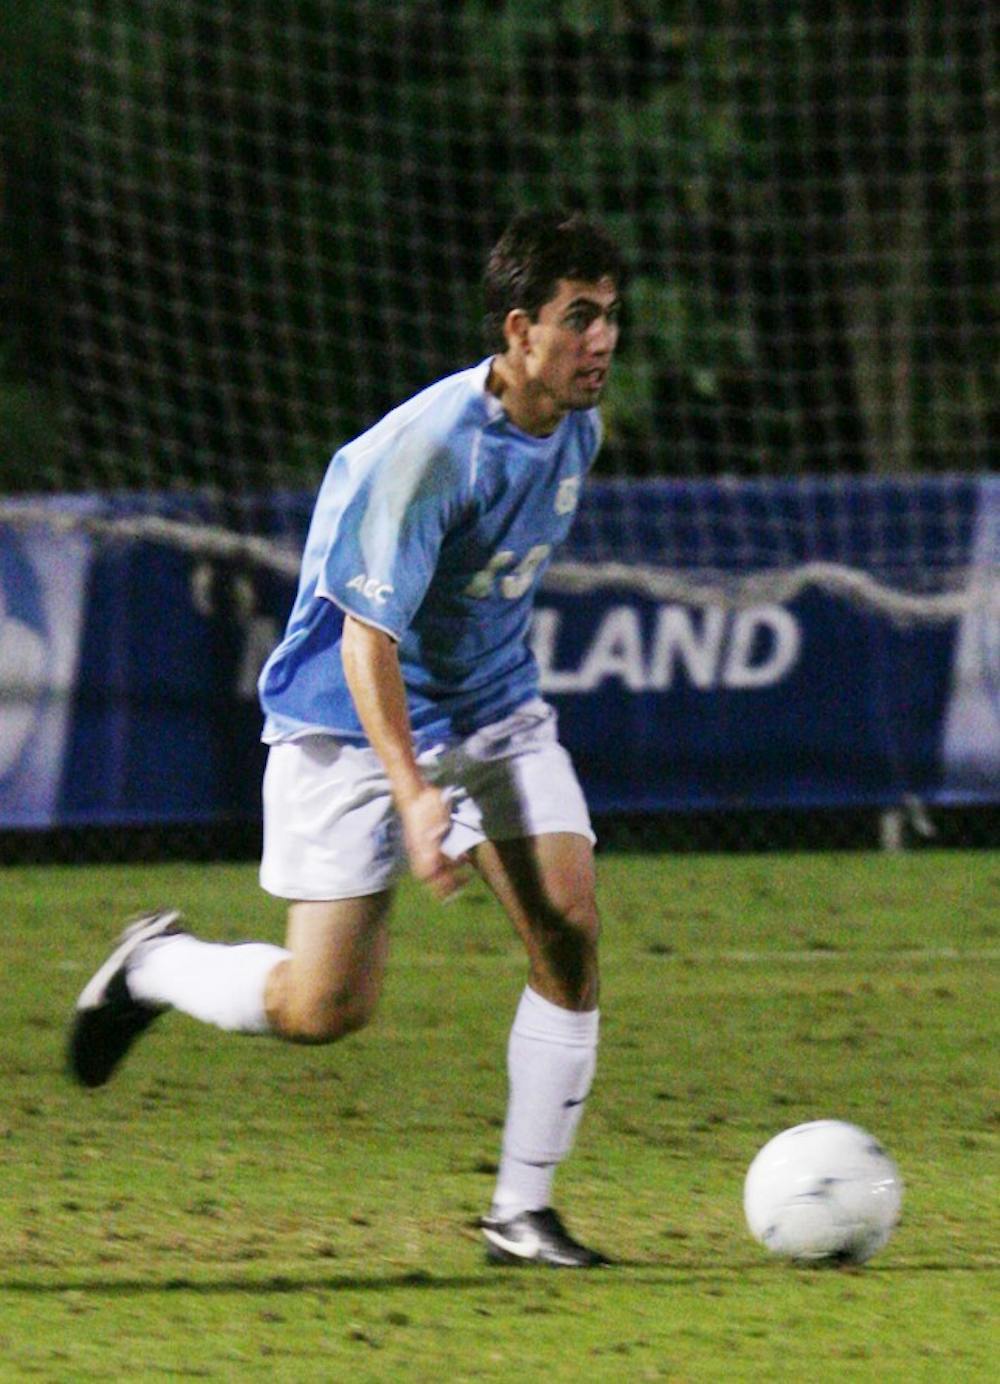 Senior midfielder Michael Farfan had a goal and an assist in UNC’s win against N.C. State in the ACC Tournament quarterfinals Wednesday.